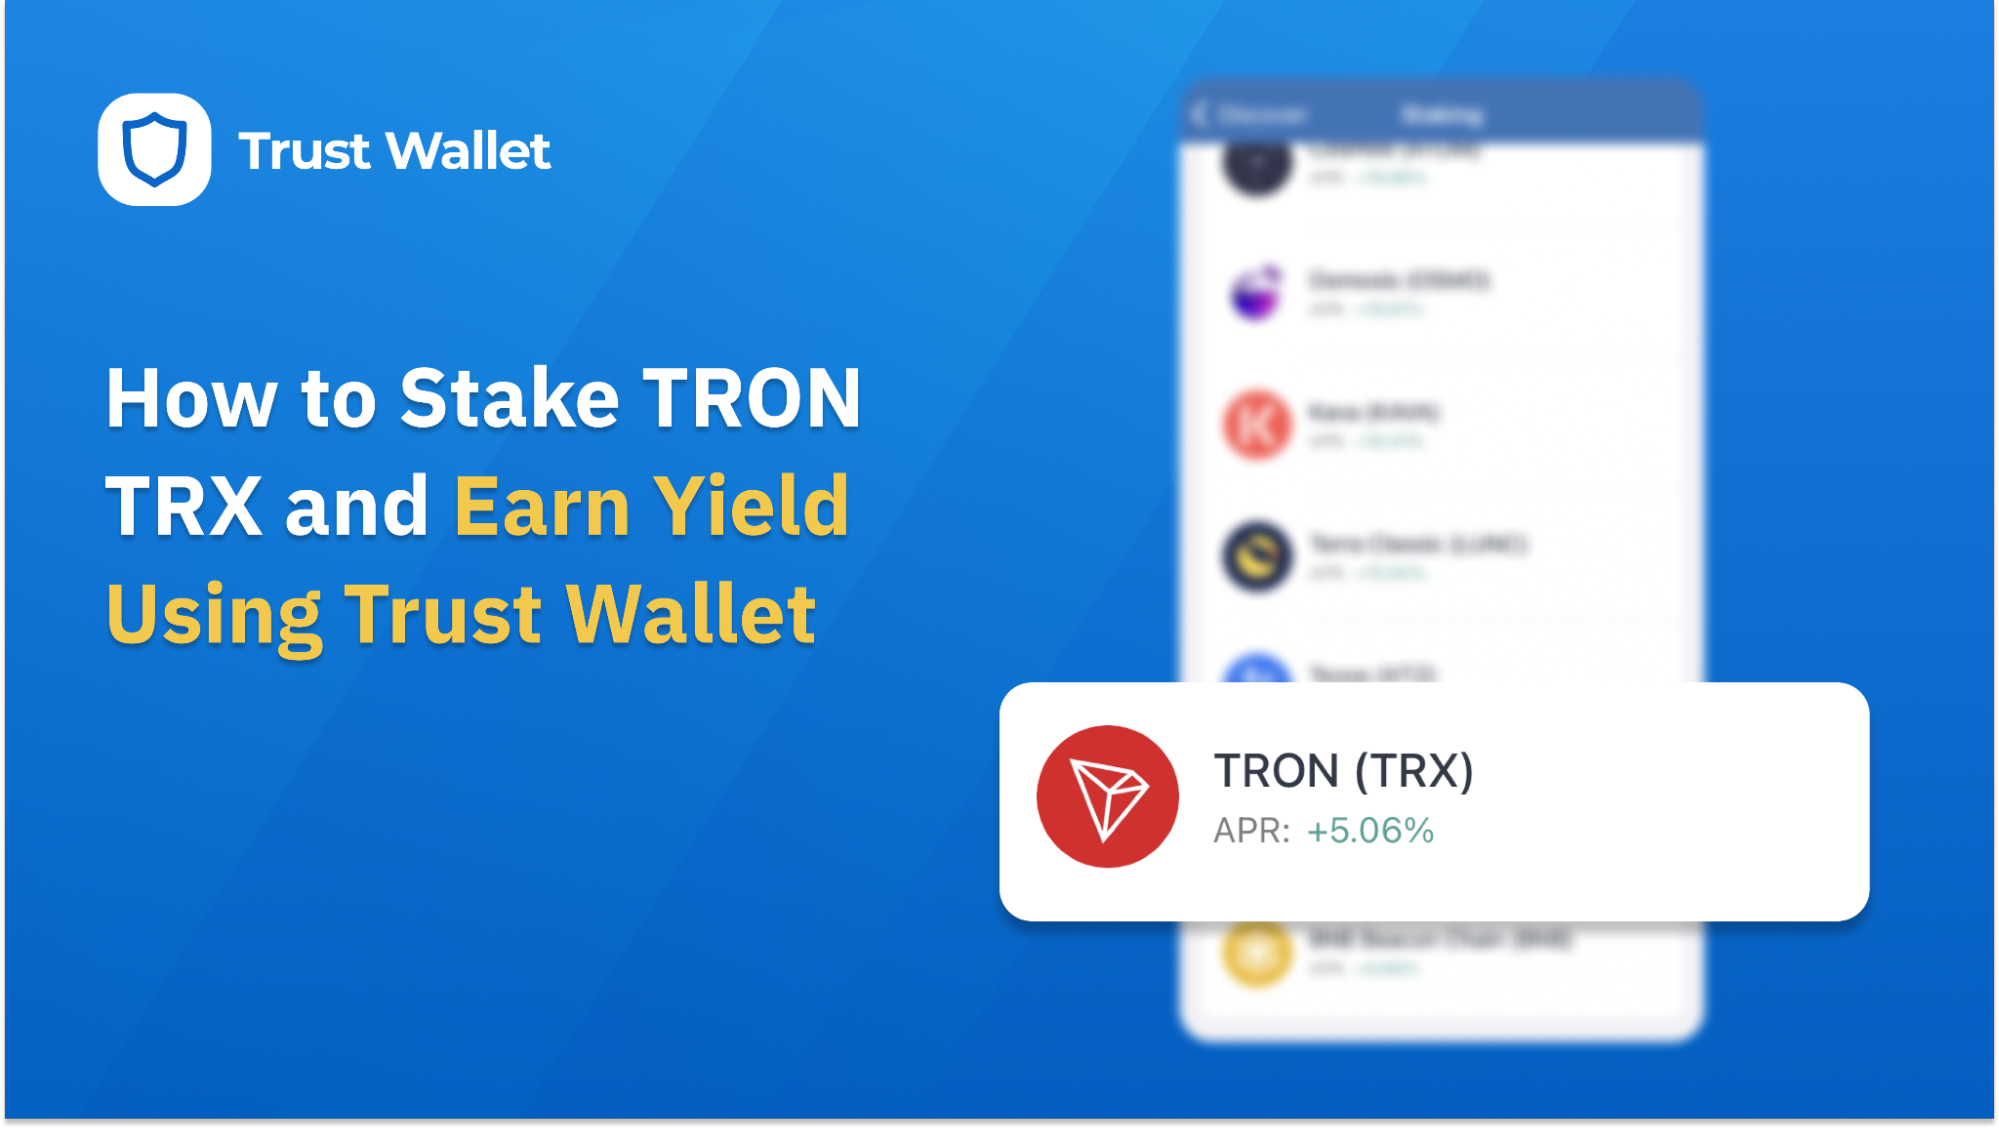 How to Stake TRON TRX and Earn Yield Using Trust Wallet